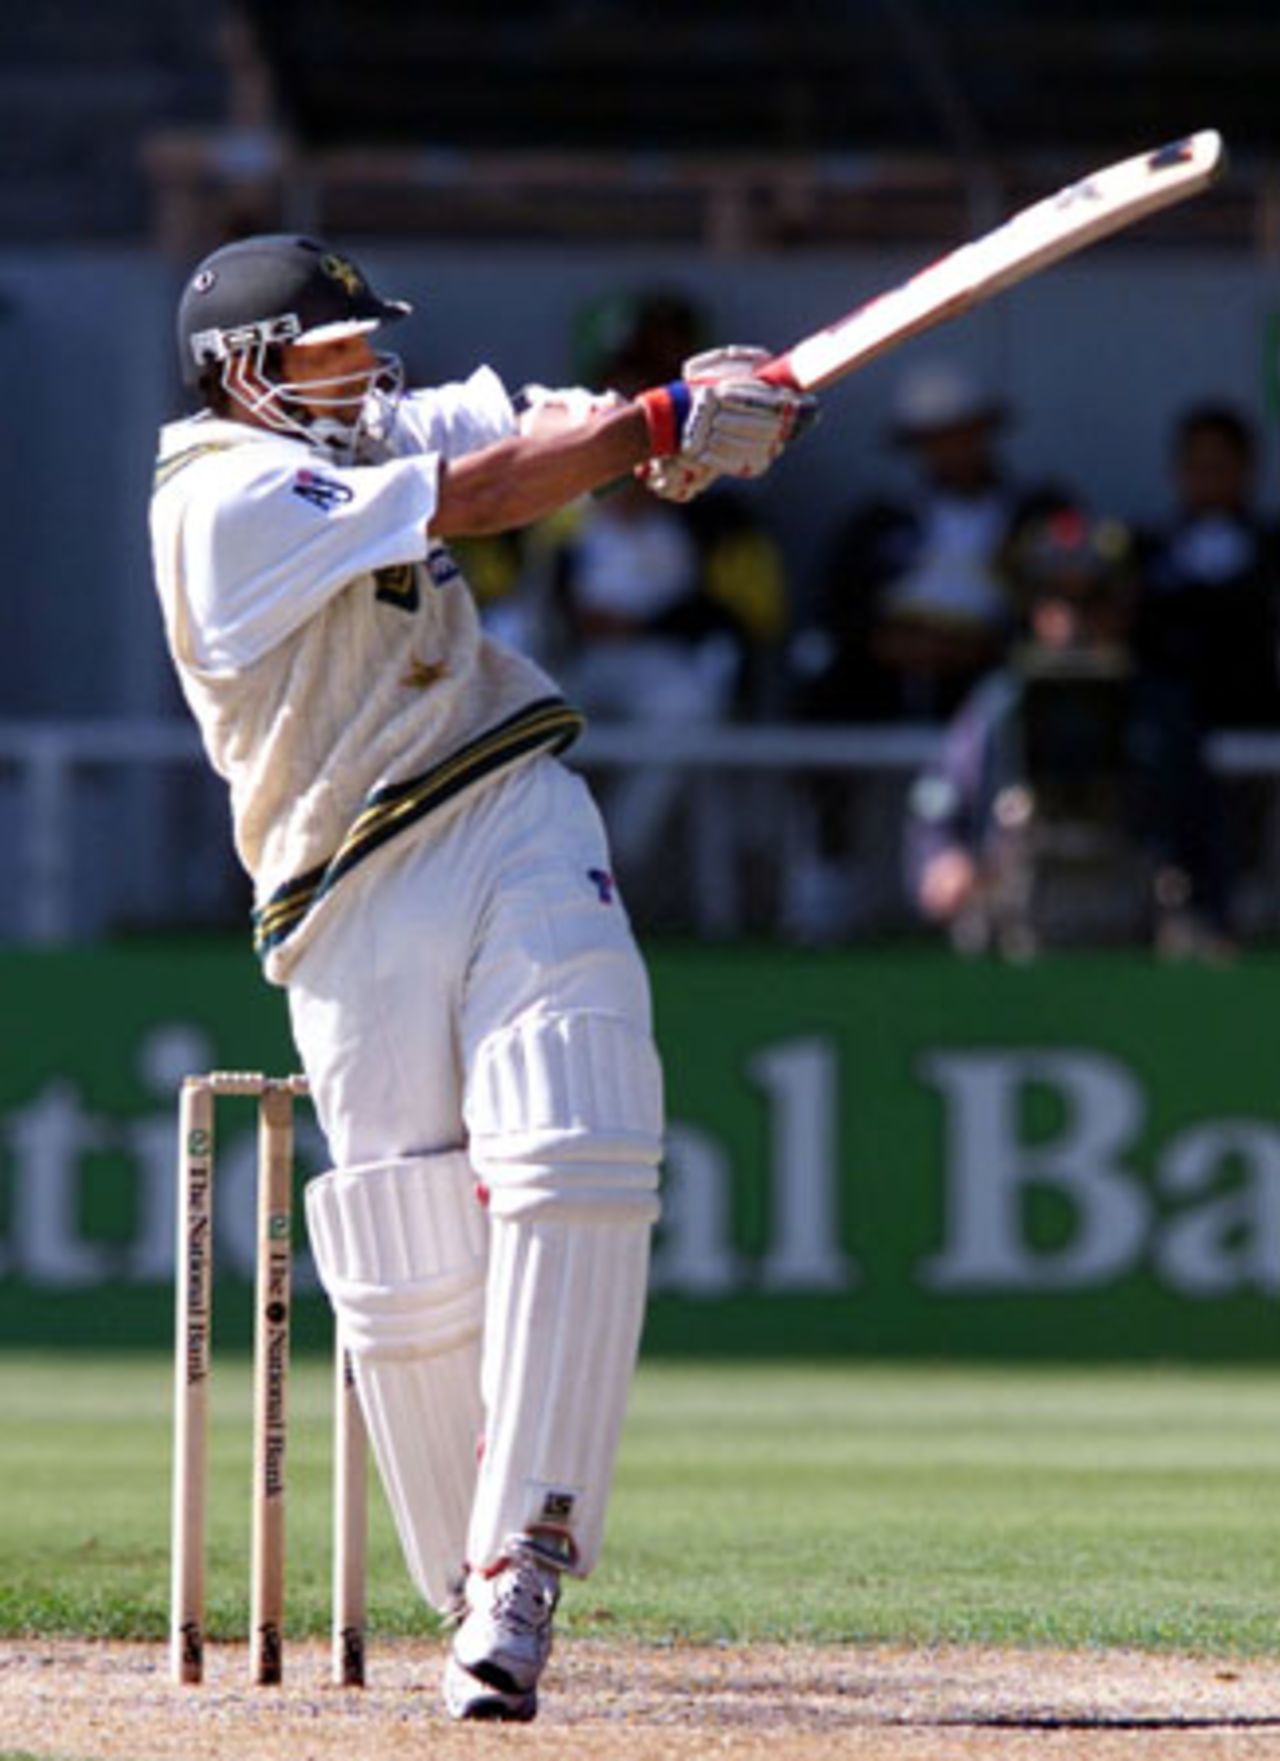 Pakistan batsman Yousuf Youhana pulls a ball during his innings of 203. It is his sixth Test century and highest first-class score. 2nd Test: New Zealand v Pakistan at Jade Stadium, Christchurch, 15-19 March 2001 (18 March 2001).